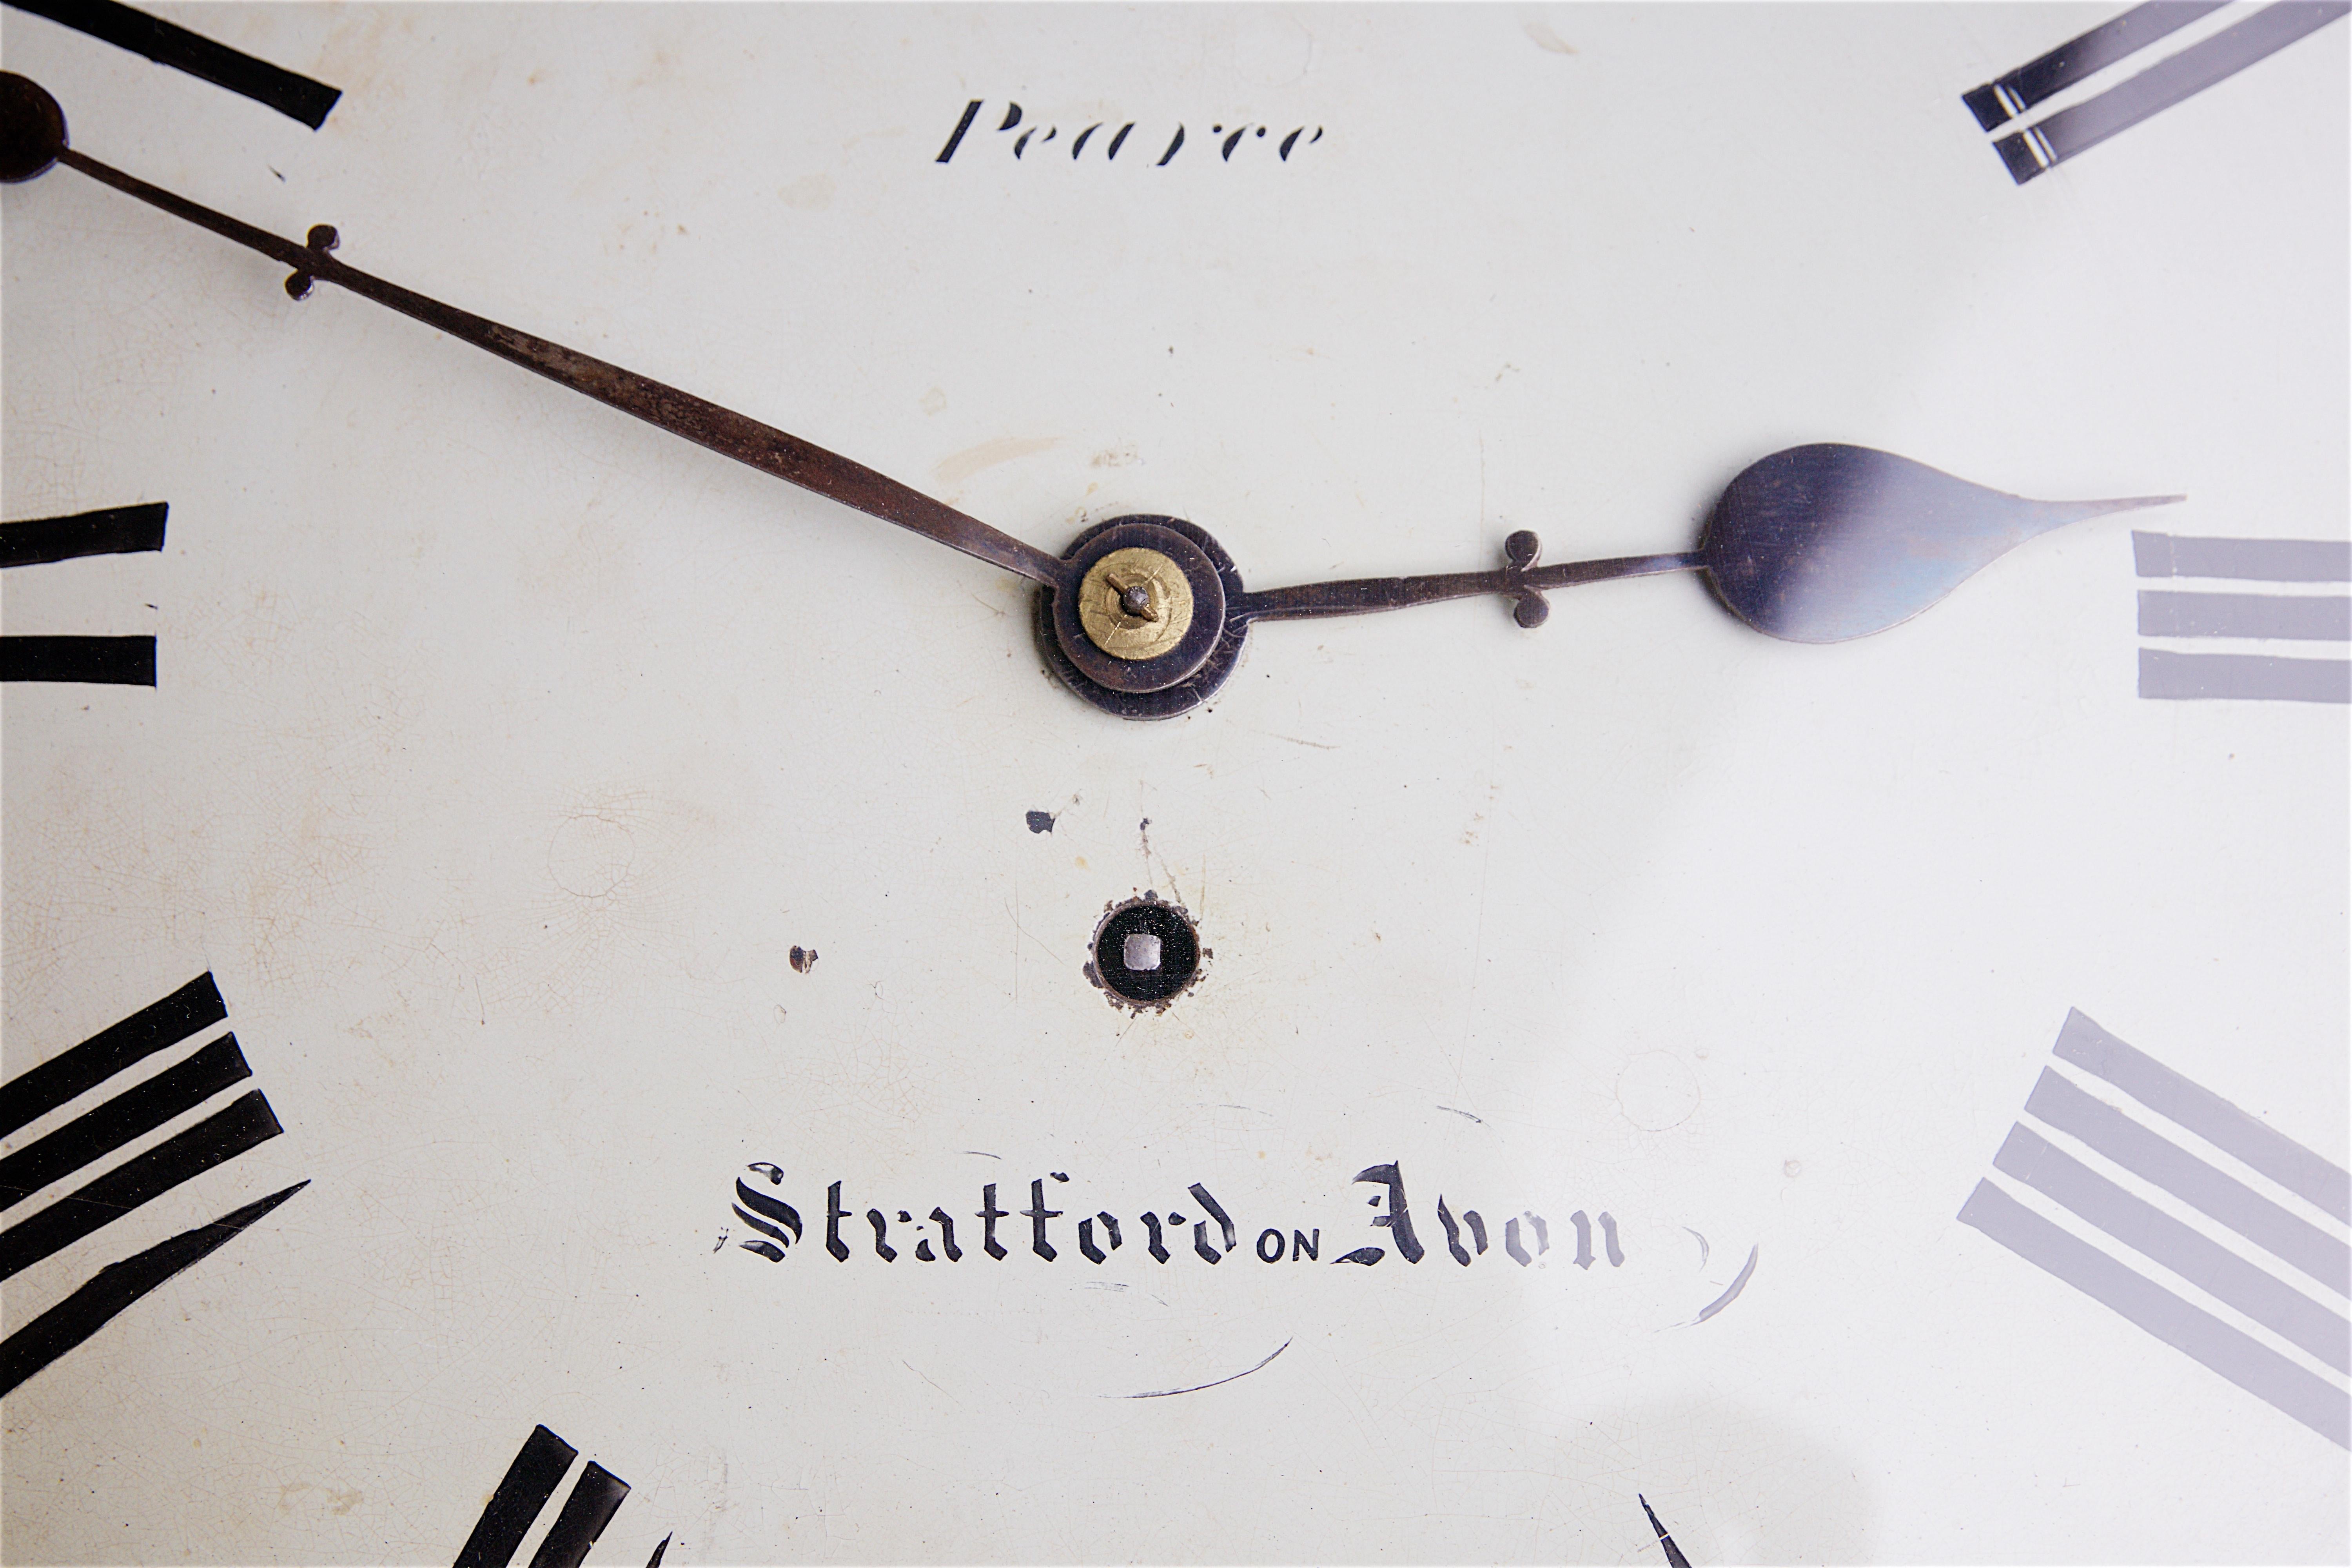 A good quality walnut veneered clock by Pearson of Stratford on Avon clock with Fusee movement – early 19th century.